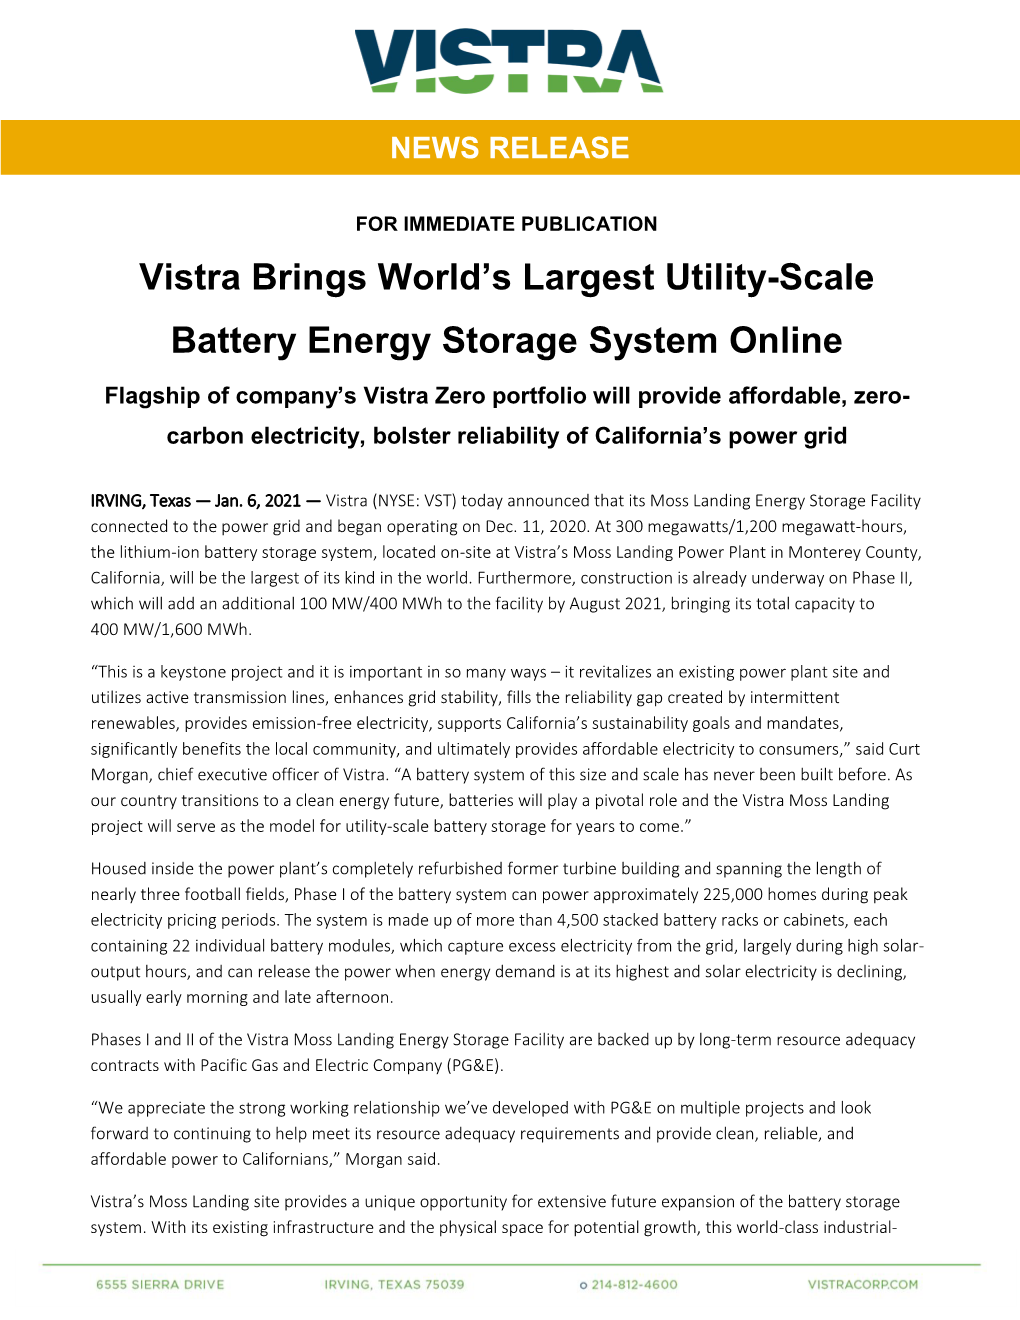 Vistra Brings World's Largest Utility-Scale Battery Energy Storage